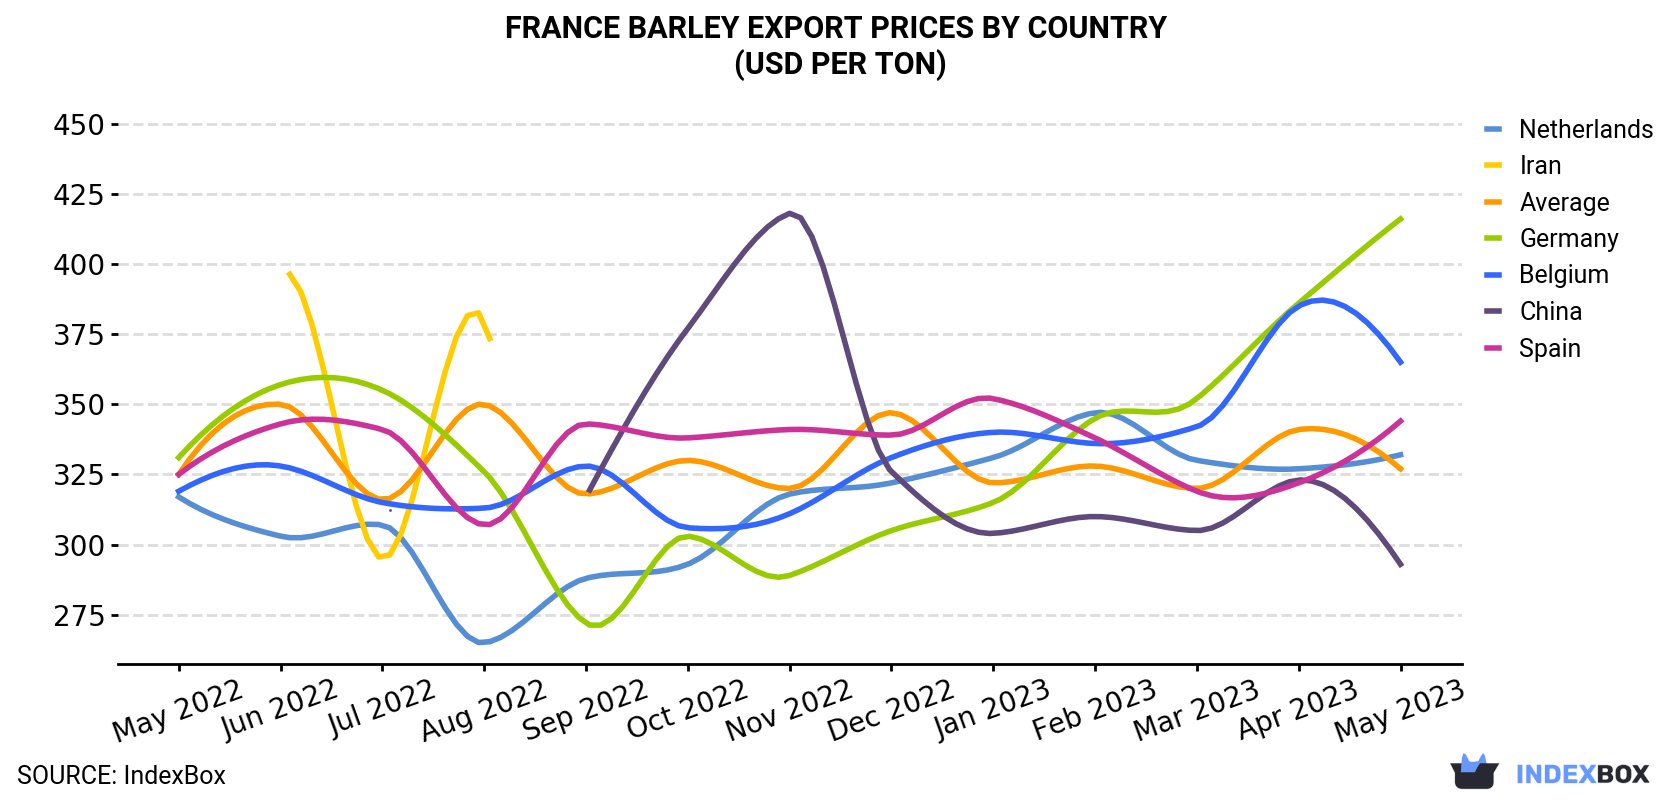 France Barley Export Prices By Country (USD Per Ton)